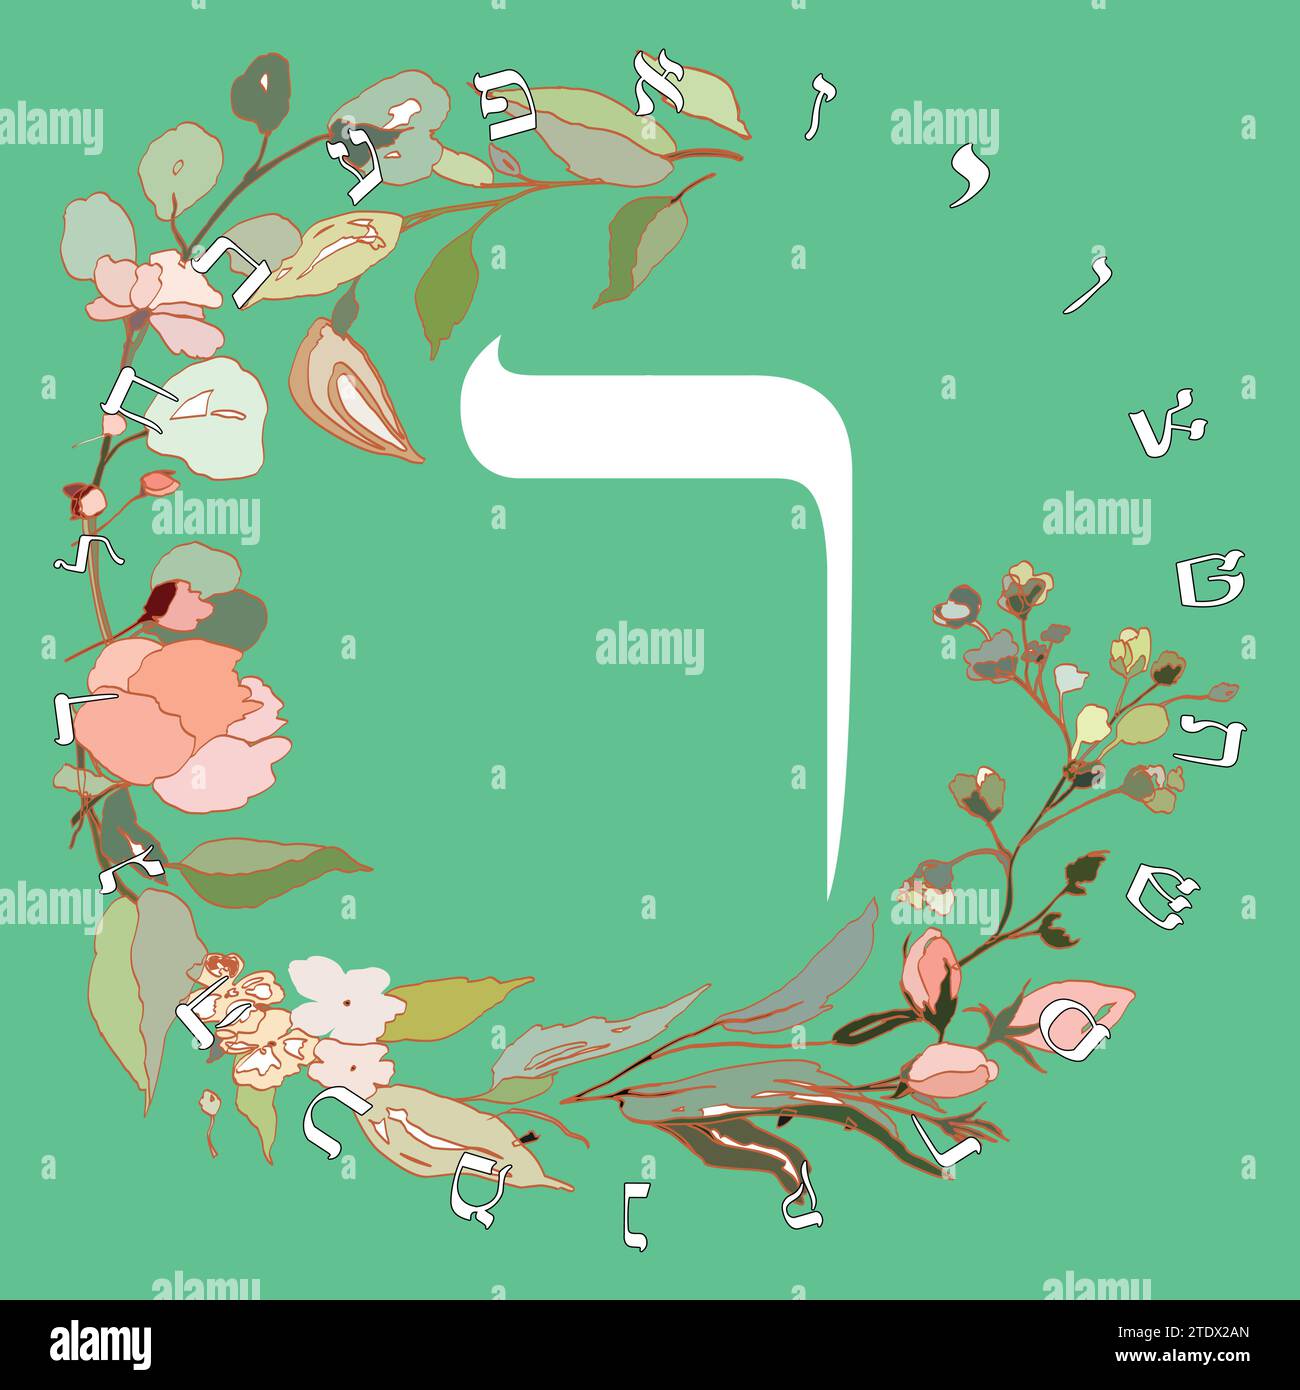 Vector illustration of the Hebrew alphabet with floral design. Hebrew letter called Resh white on green background. Stock Vector